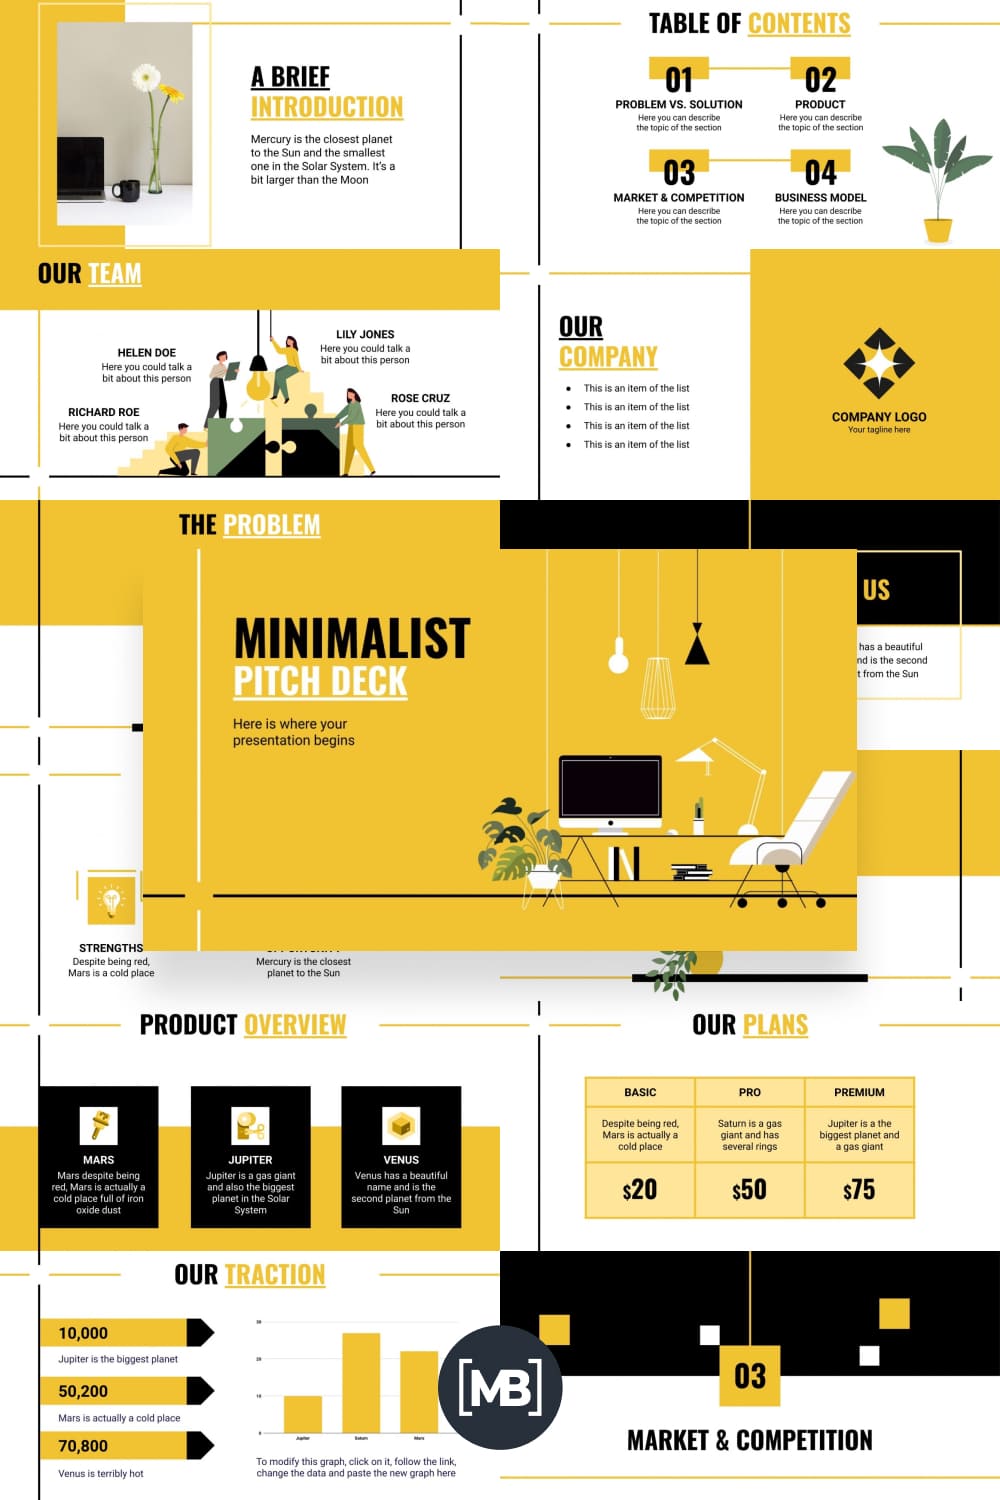 Bright and modern template with yellow accents.